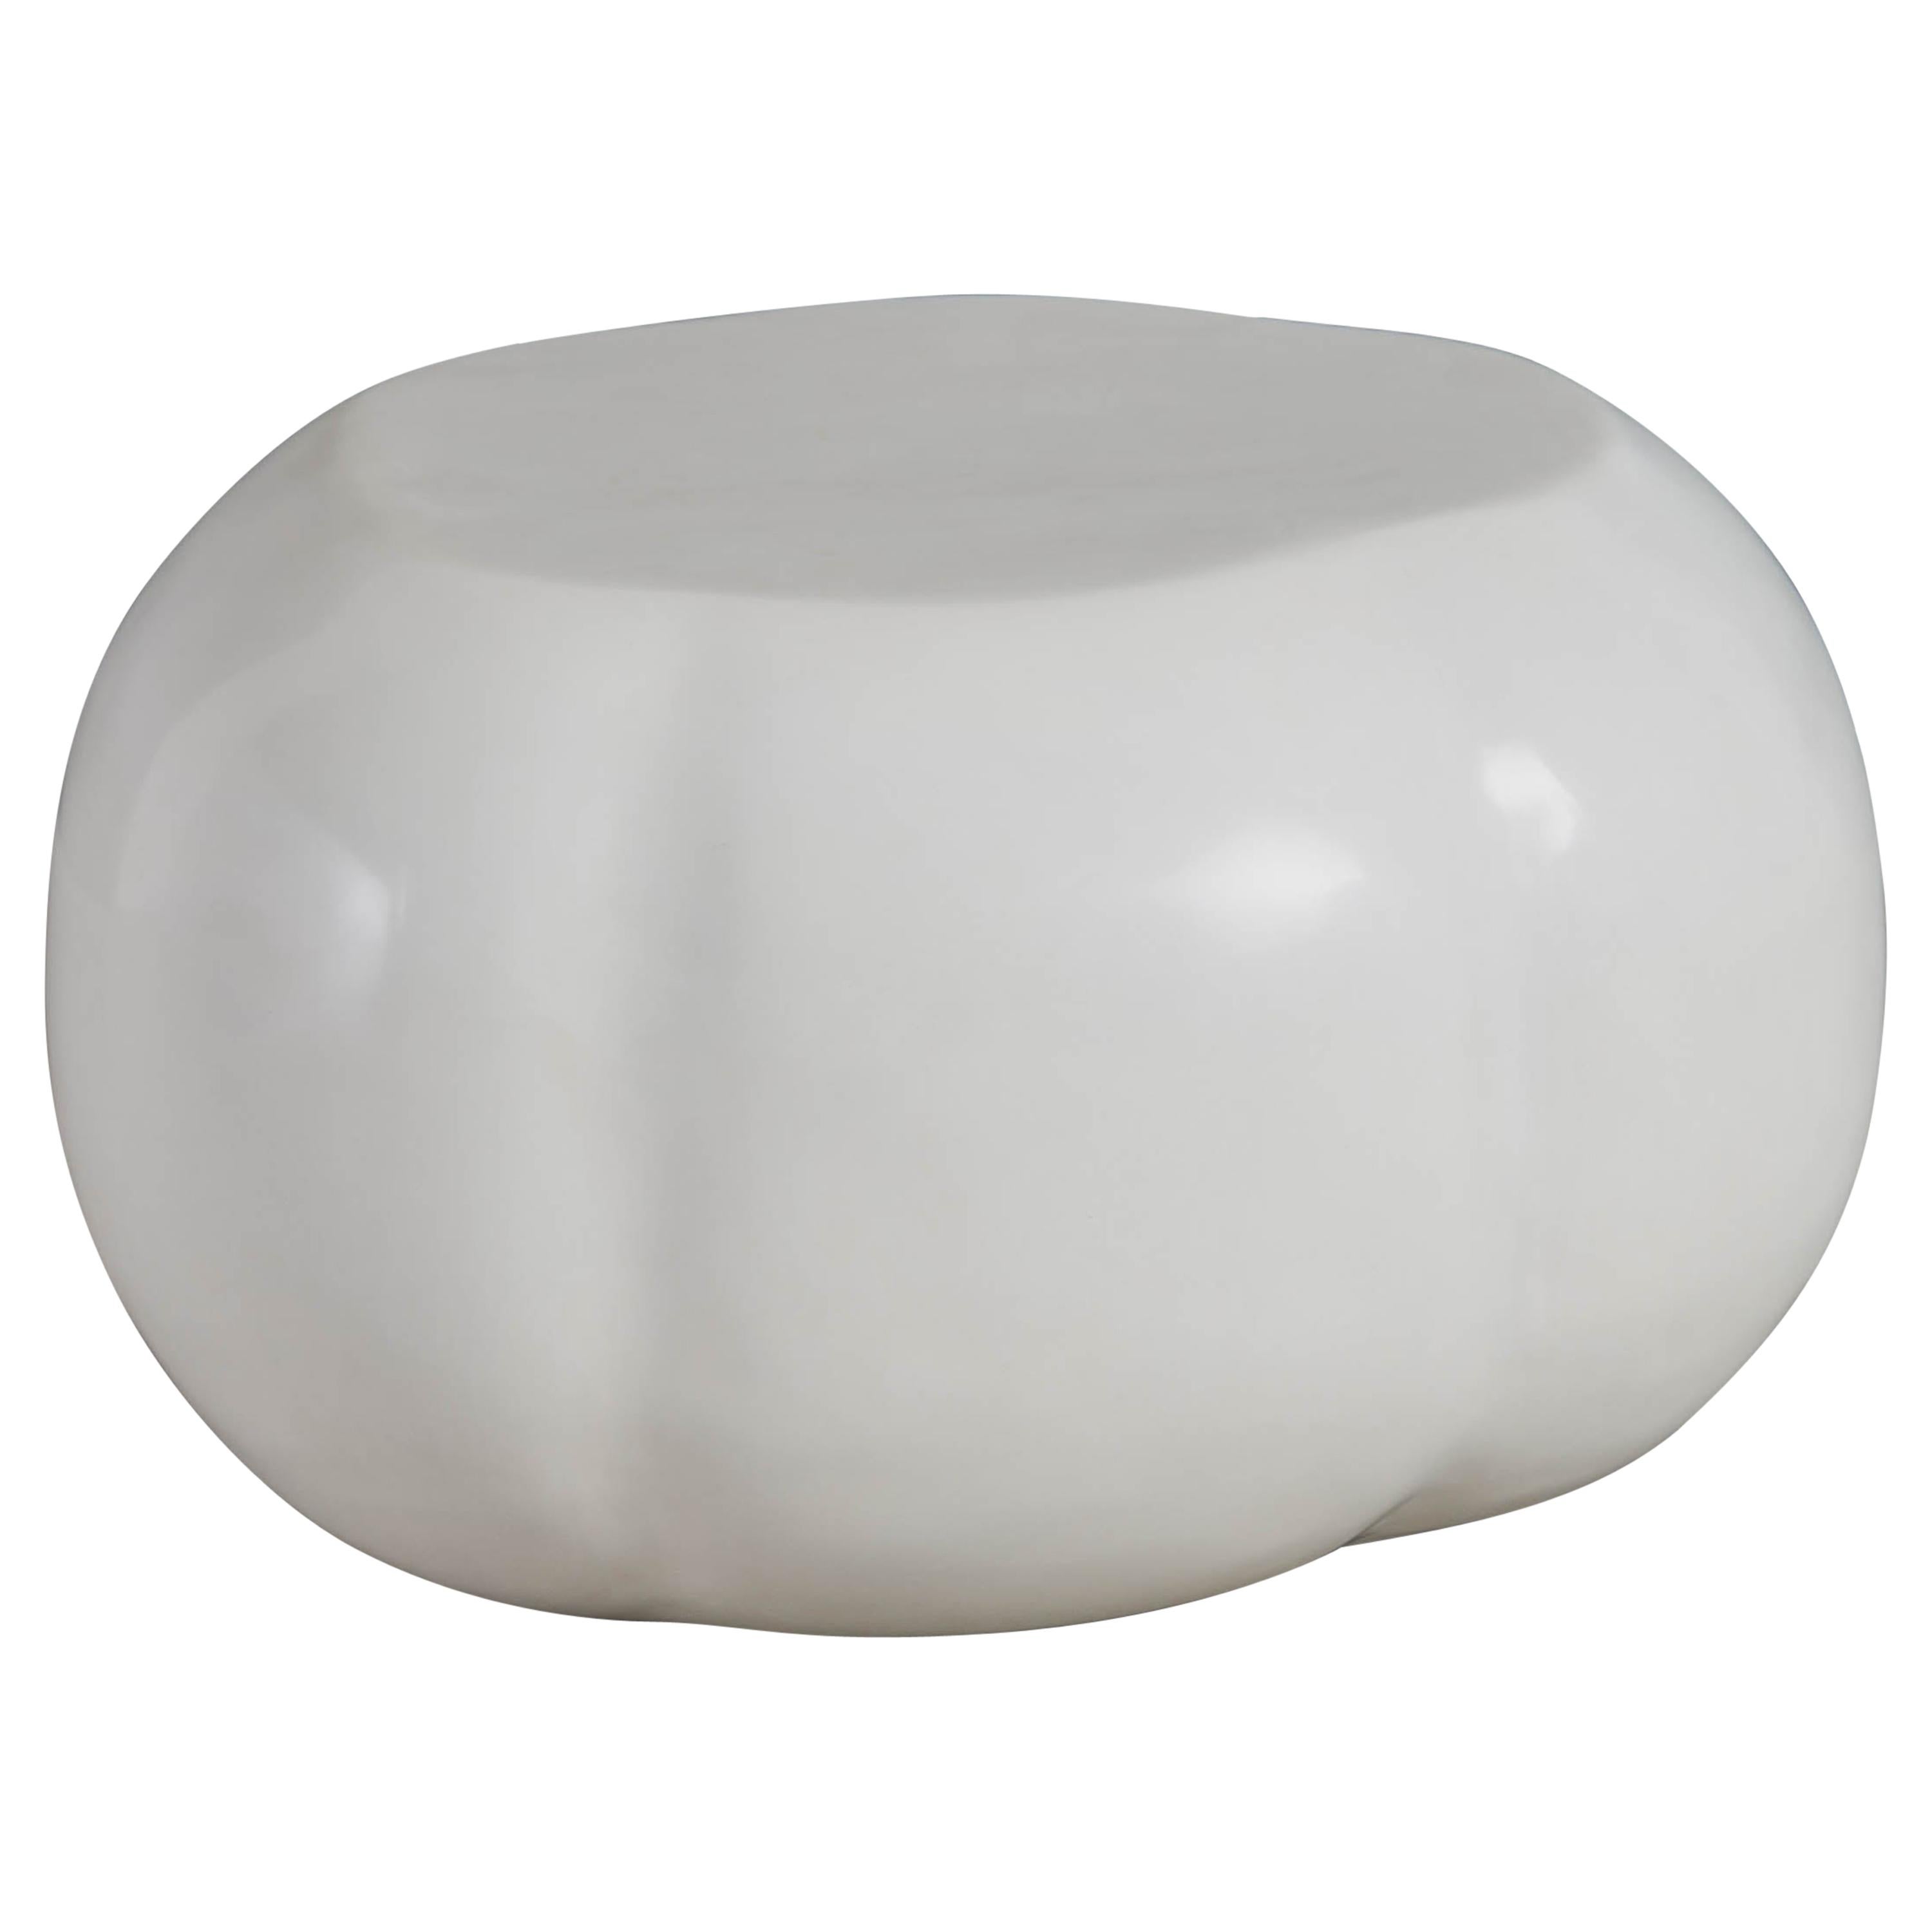 Pong Cloud Seat, Medium, Cream Lacquer by Robert Kuo, Hand Repousse, Limited For Sale